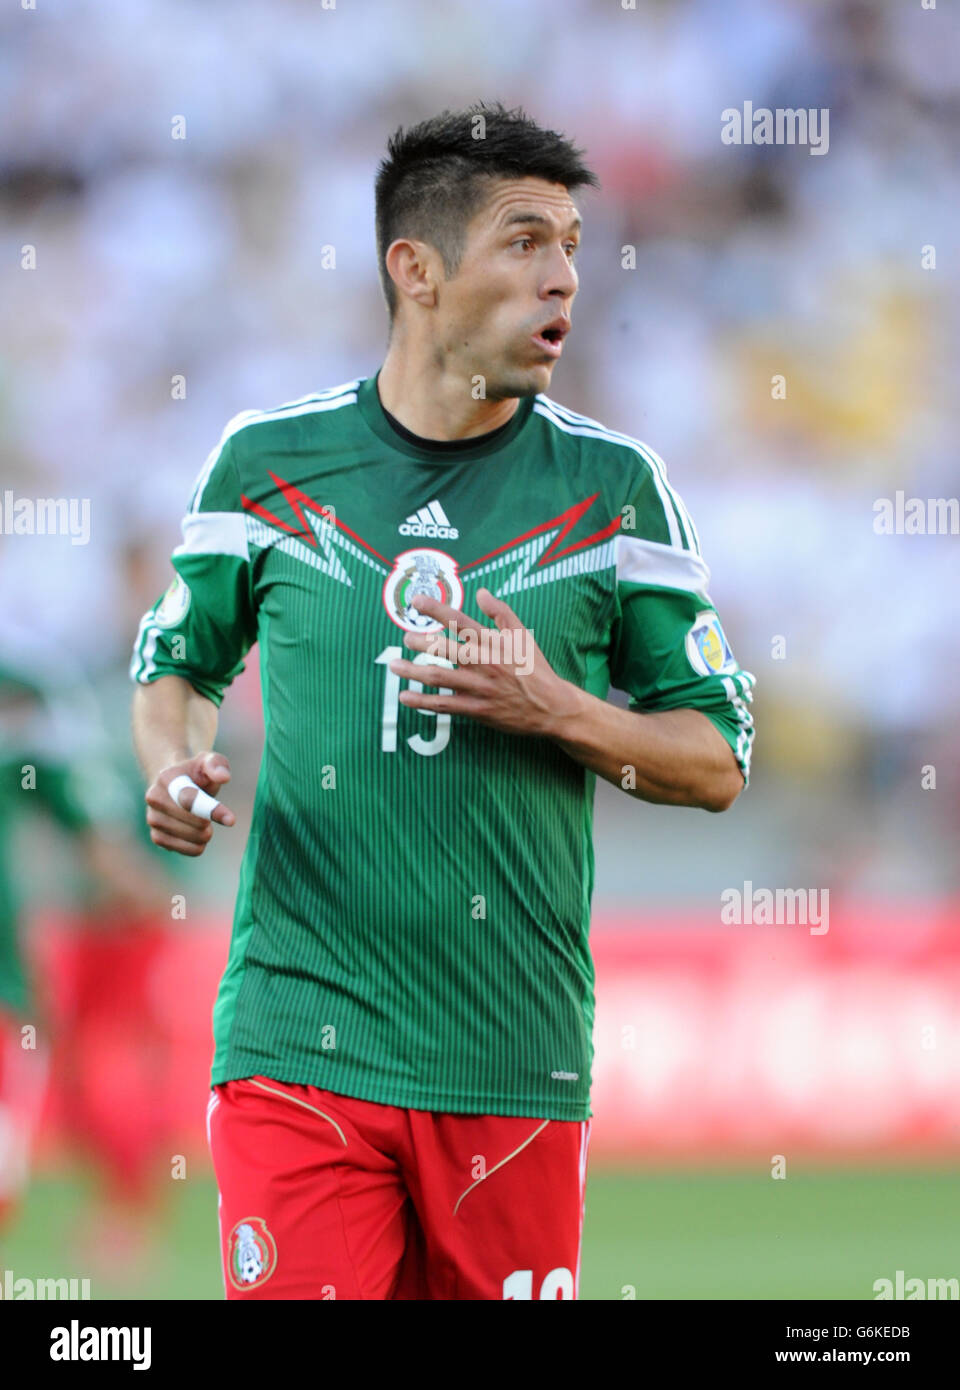 Soccer - FIFA World Cup Qualifying - Play off - Second Leg - New Zealand v Mexico - Westpac Stadium. Mexico's Oribe Peralta Stock Photo